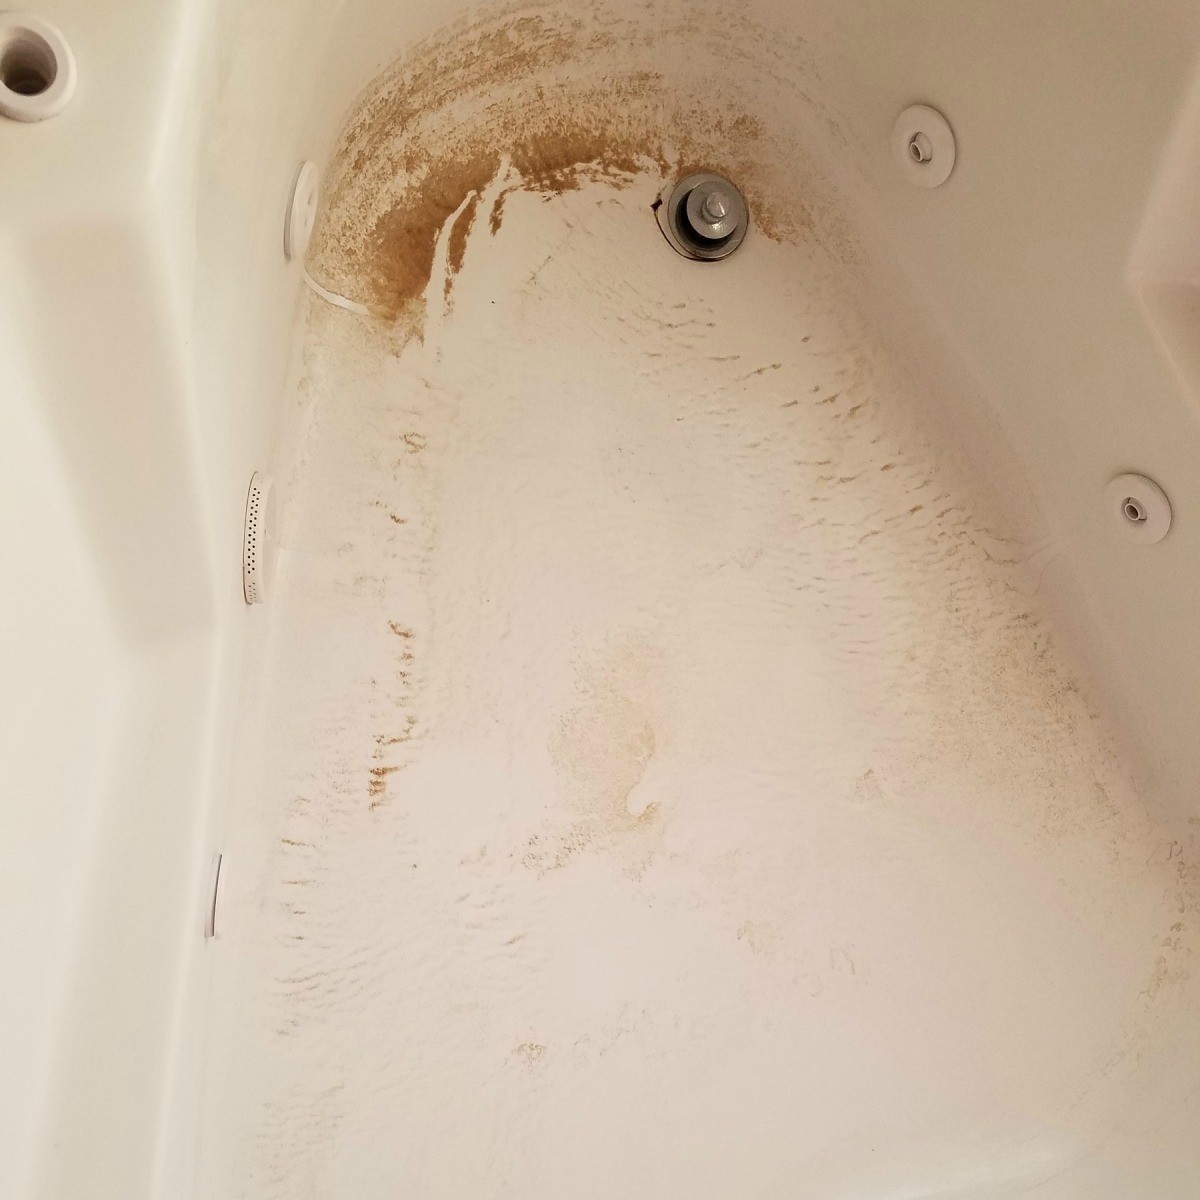 Jacuzzi Bathtub Has Sand In Water Pipes, How To Remove And Clean Bathtub Jets